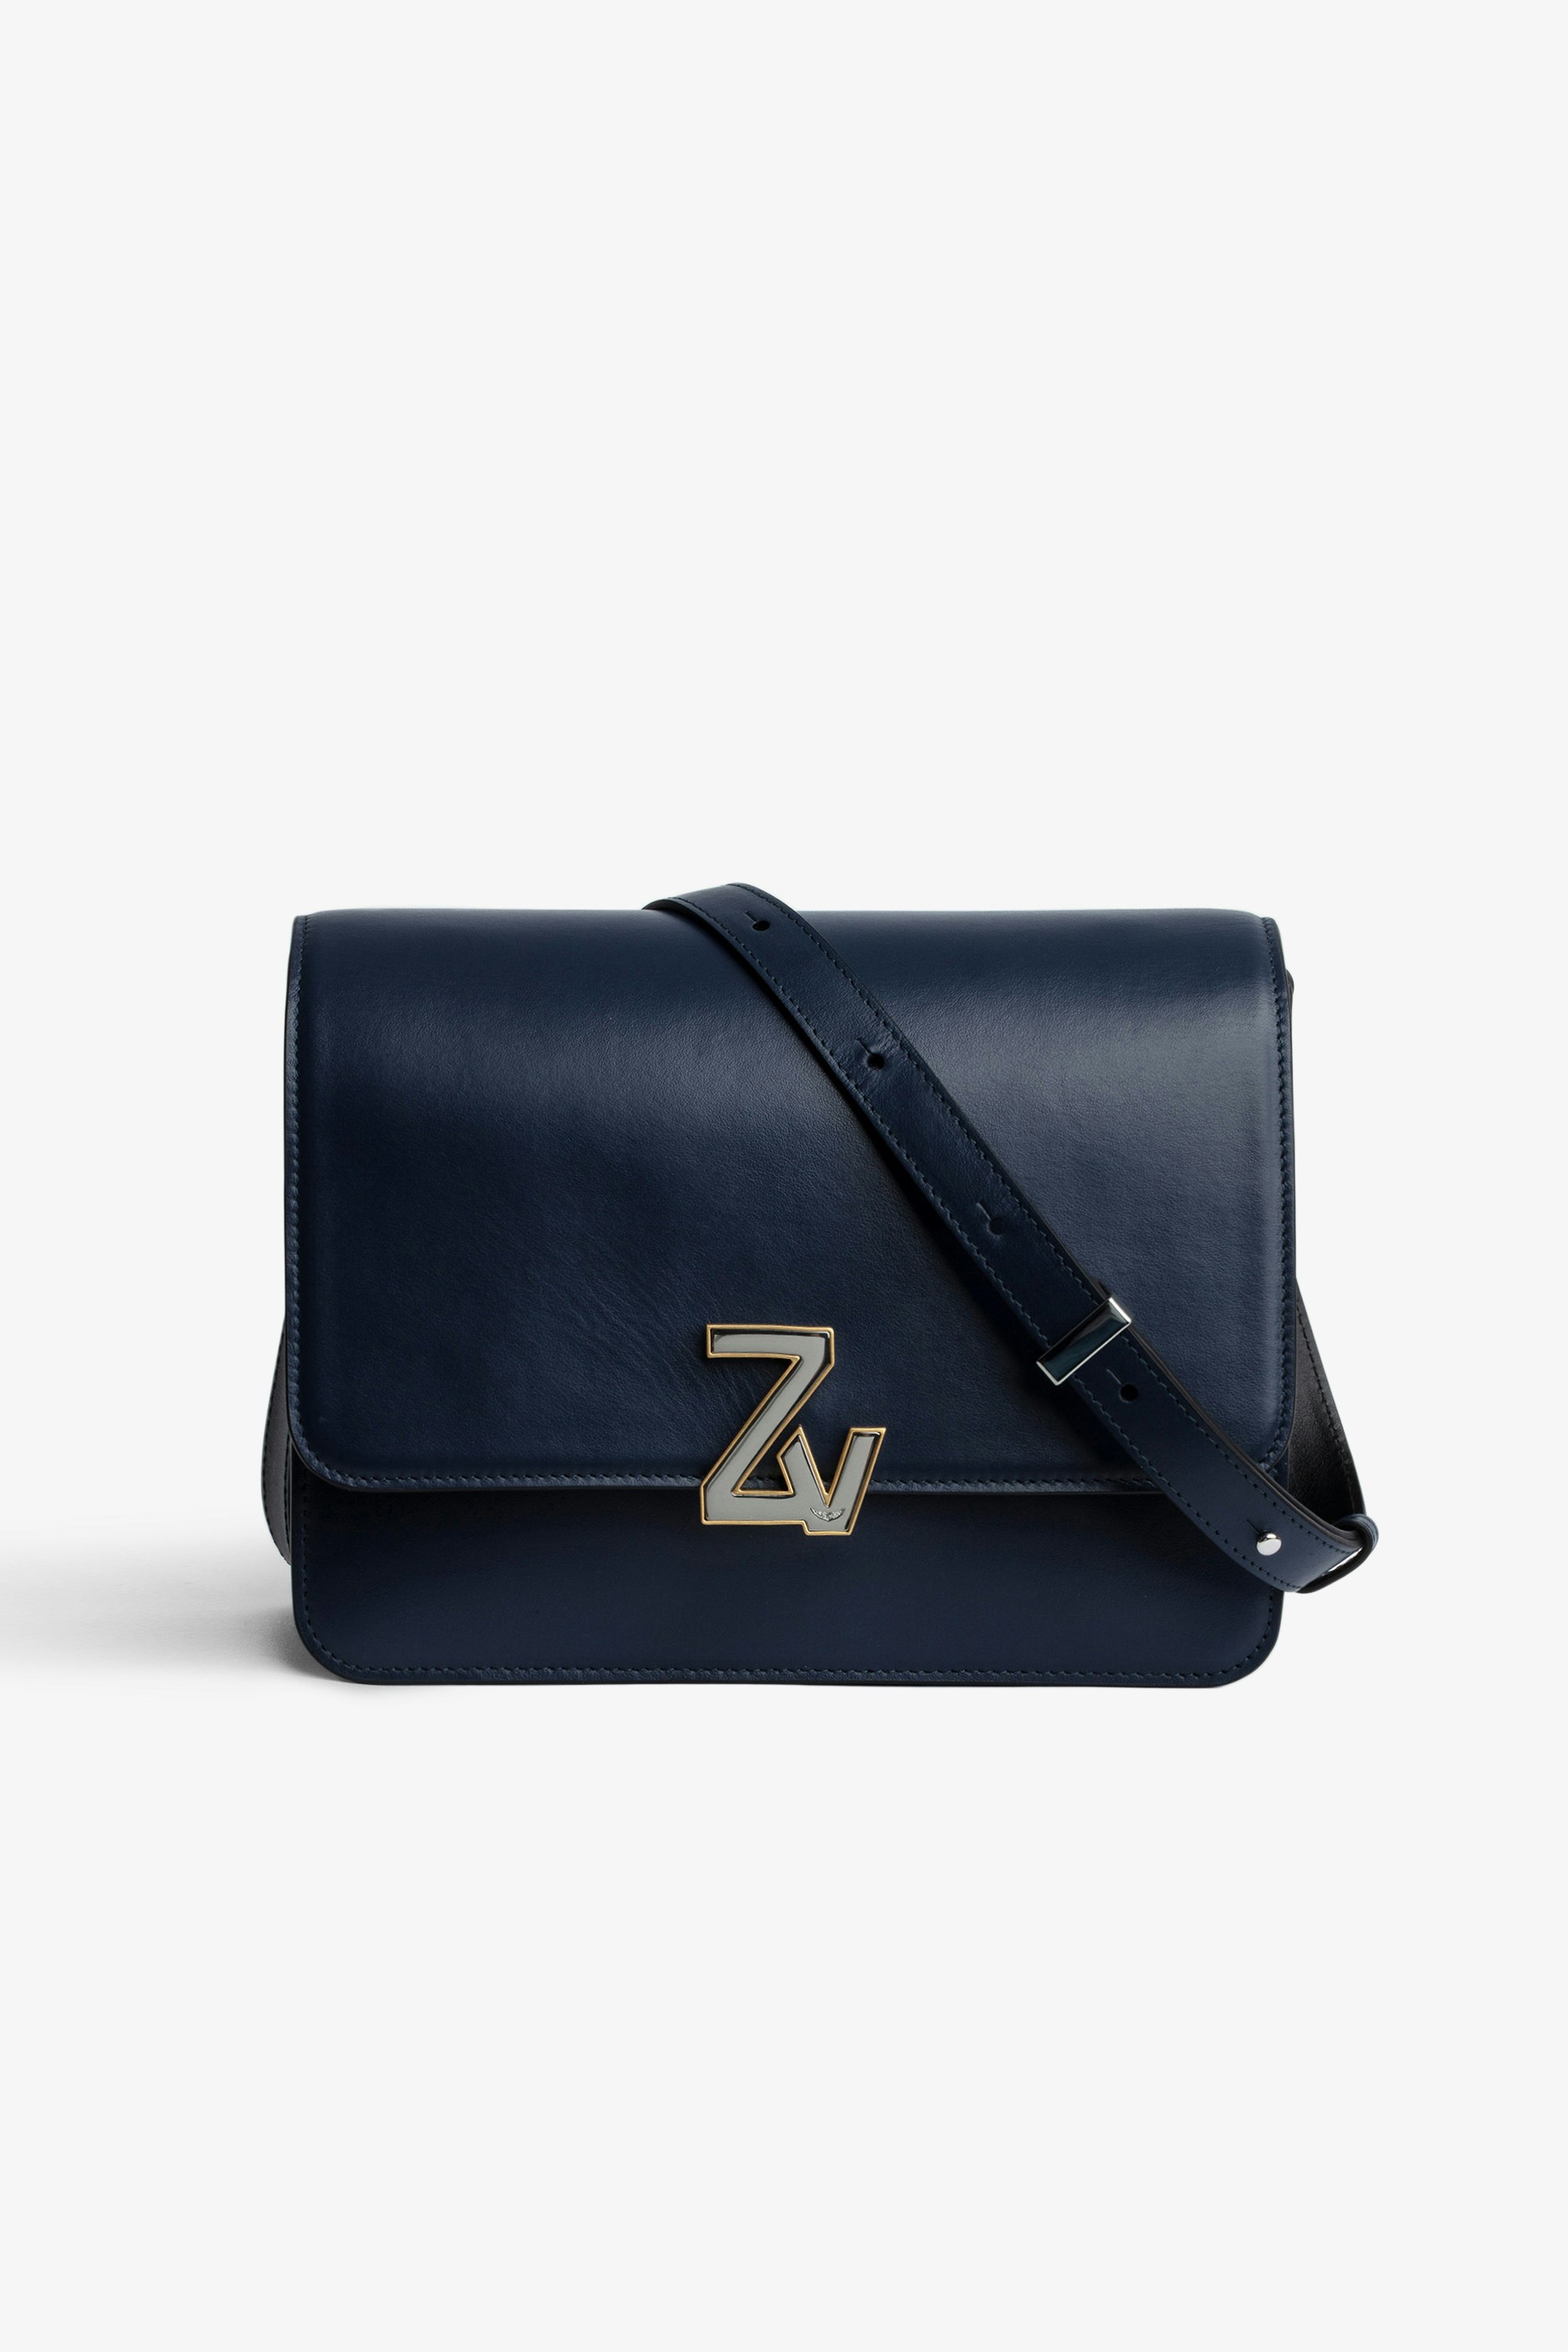 ZV Initiale Le City Bag Women’s ZV Initiale Le City bag in navy blue smooth leather